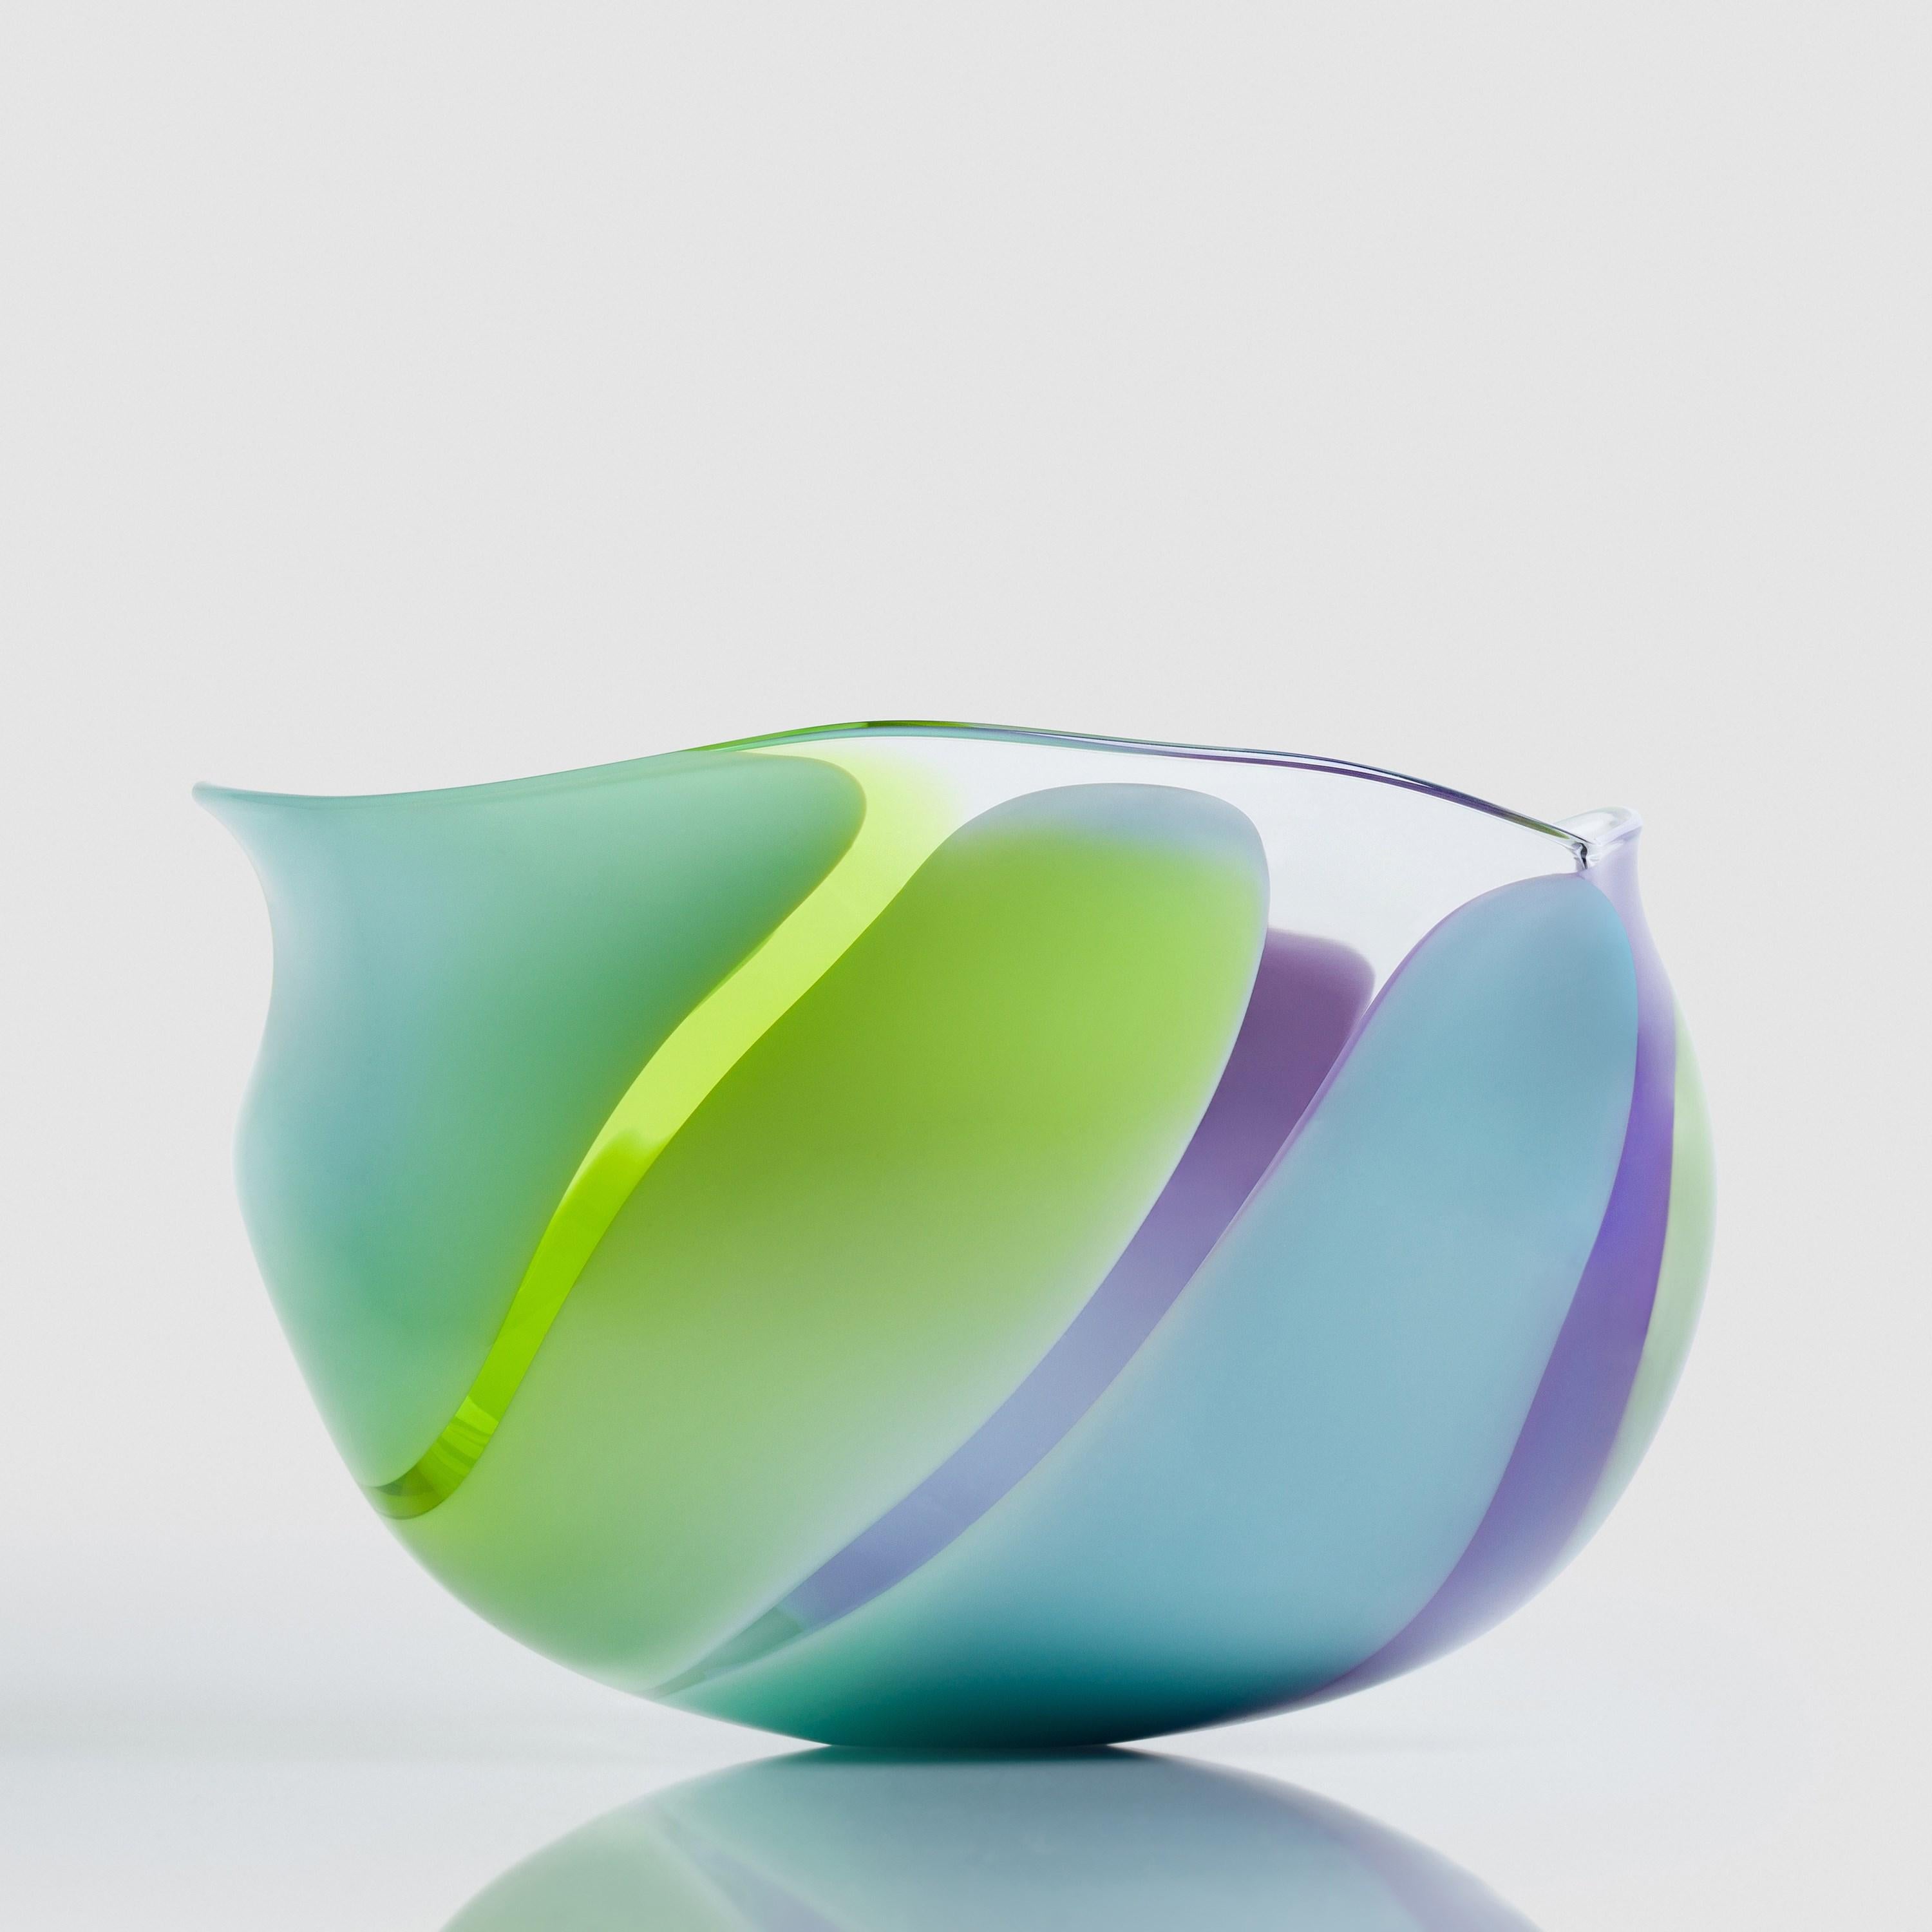 Hand-Crafted Waves No 652, lime, aqua & purple abstract fluid glass bowl by Neil Wilkin